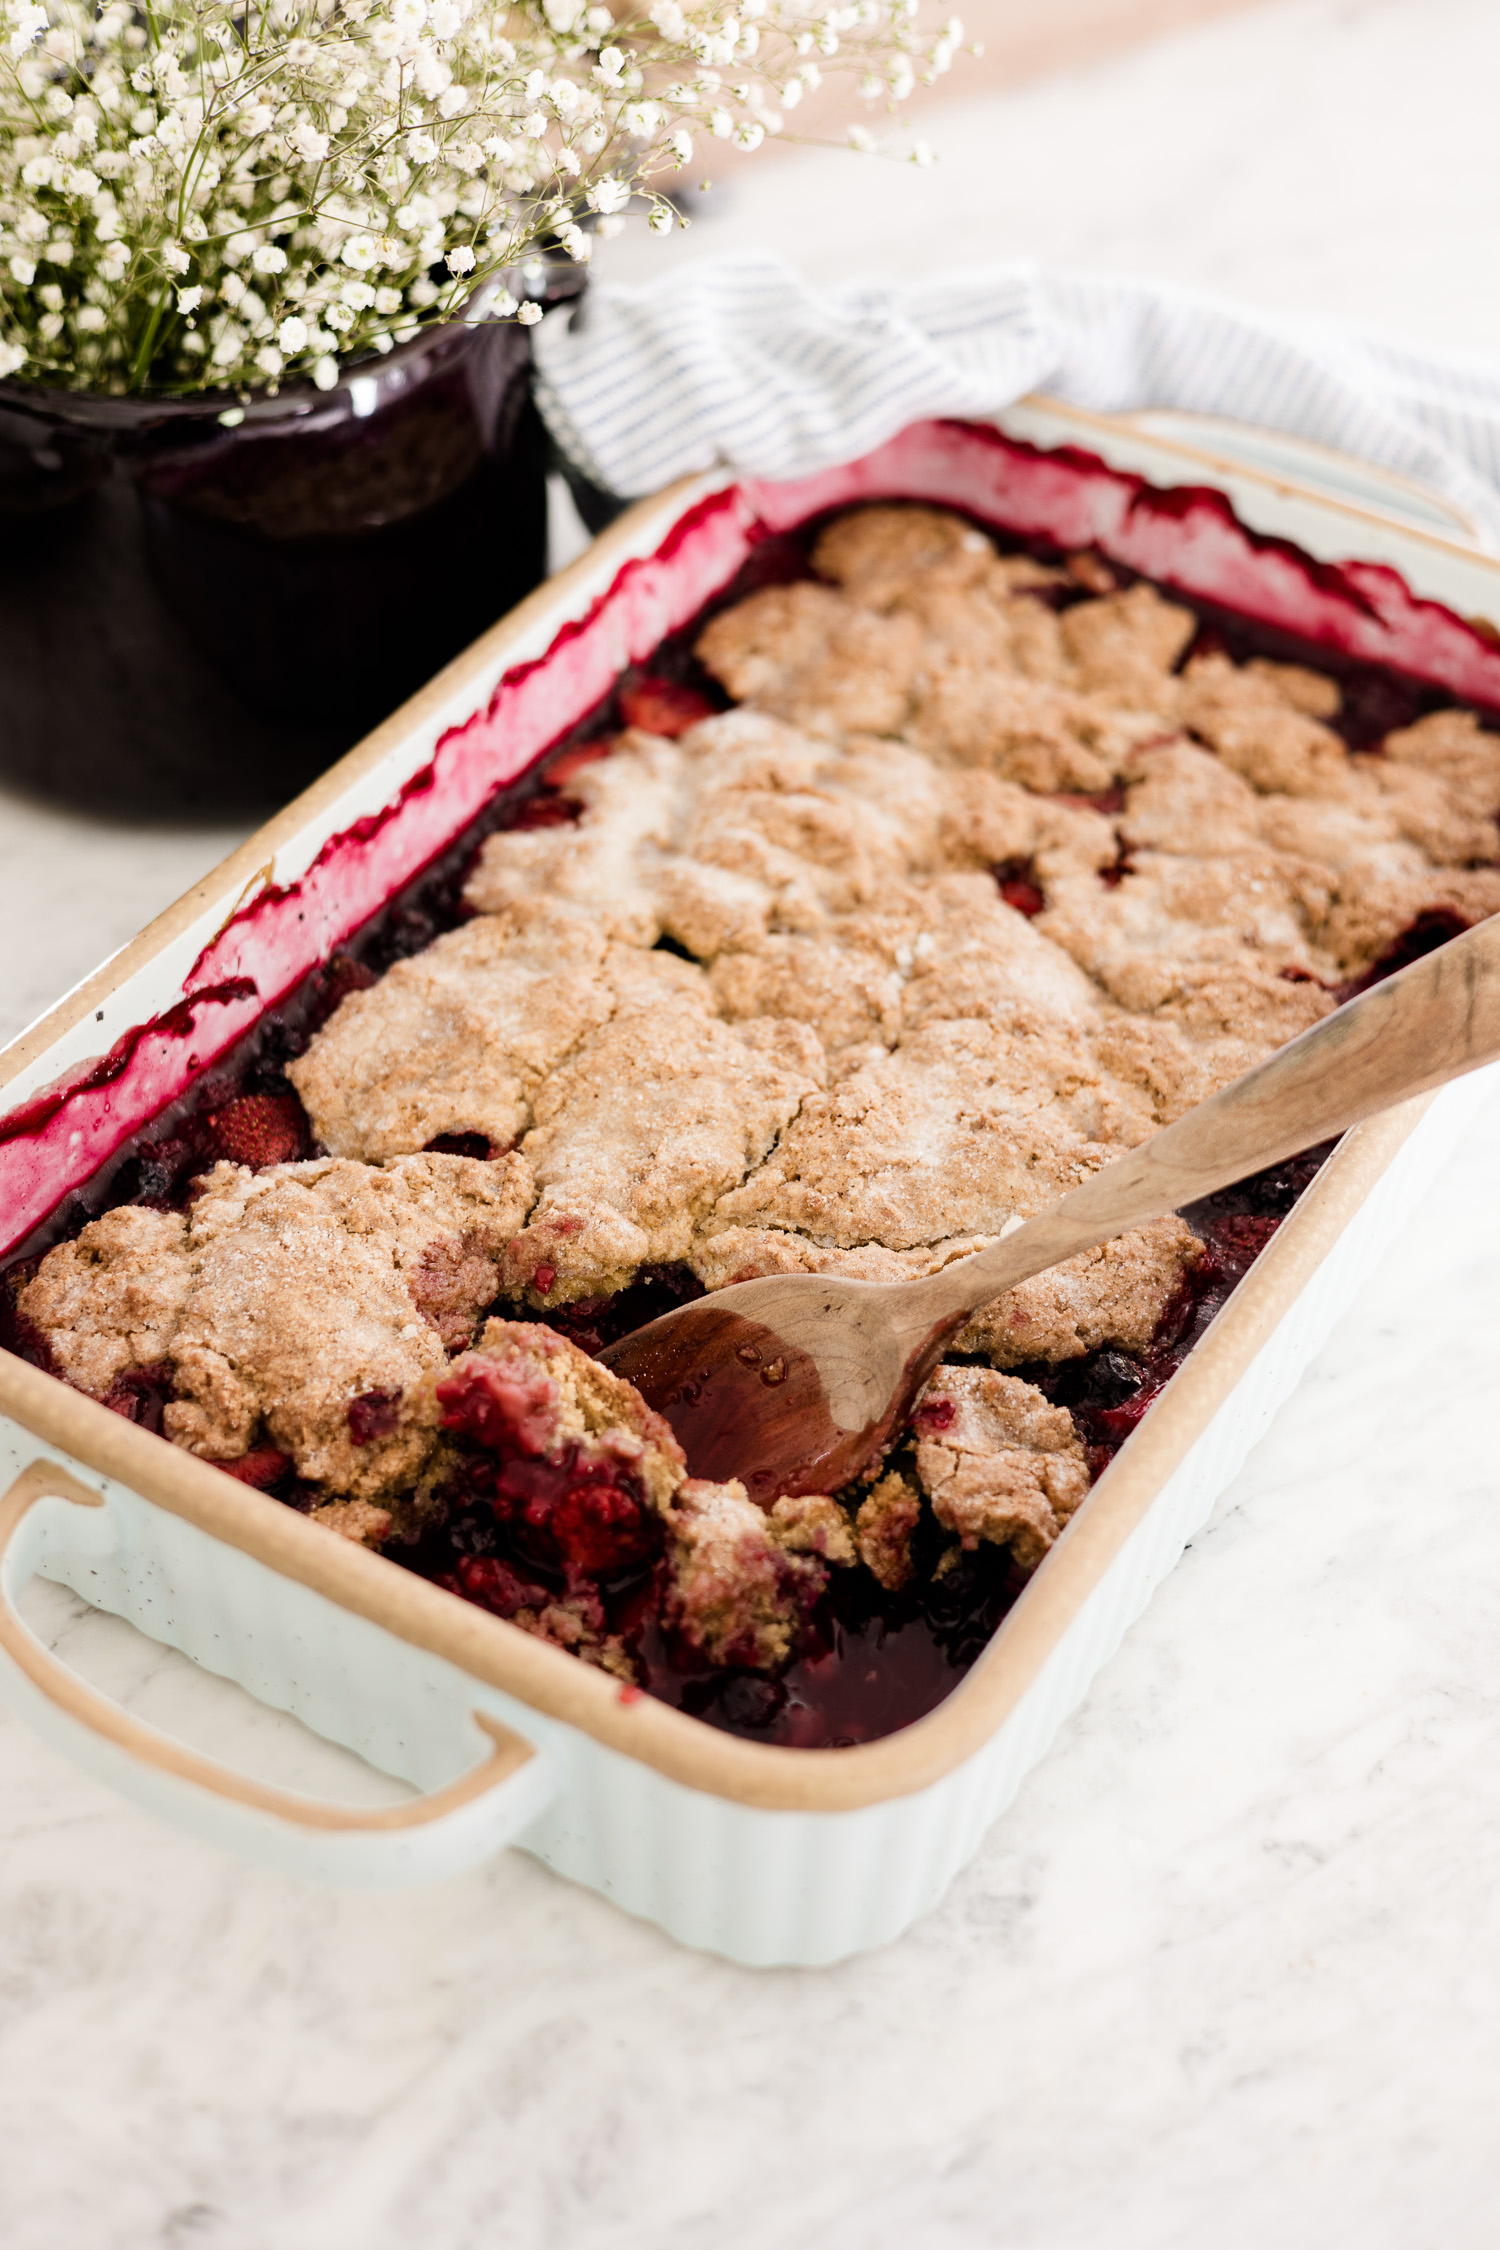 mixed Berry cobbler in casserole dish with wooden spoon